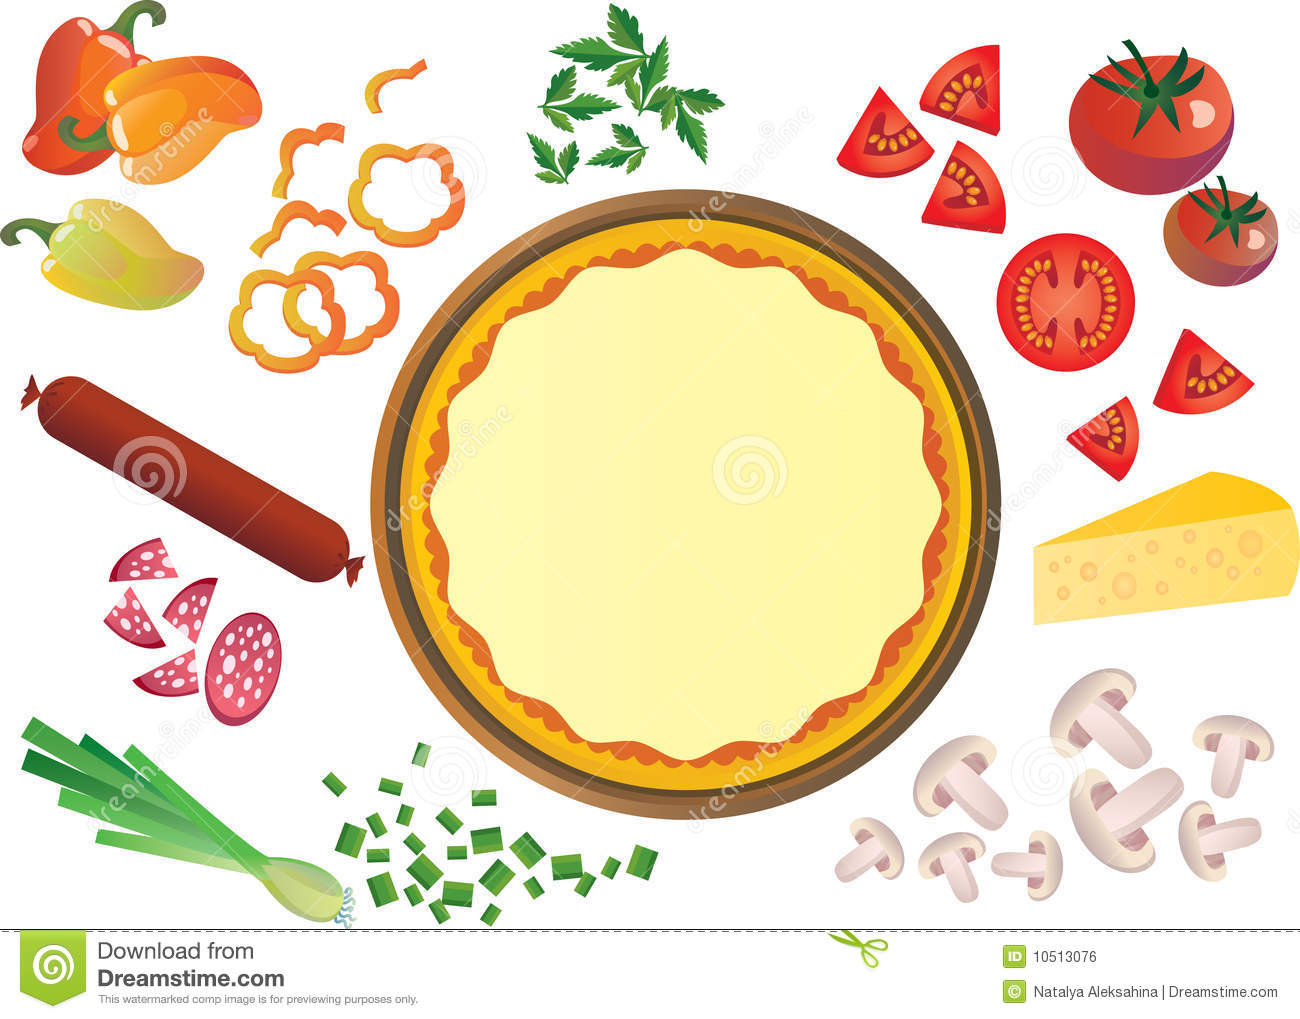 Pizza ingredients Royalty Free Stock Image